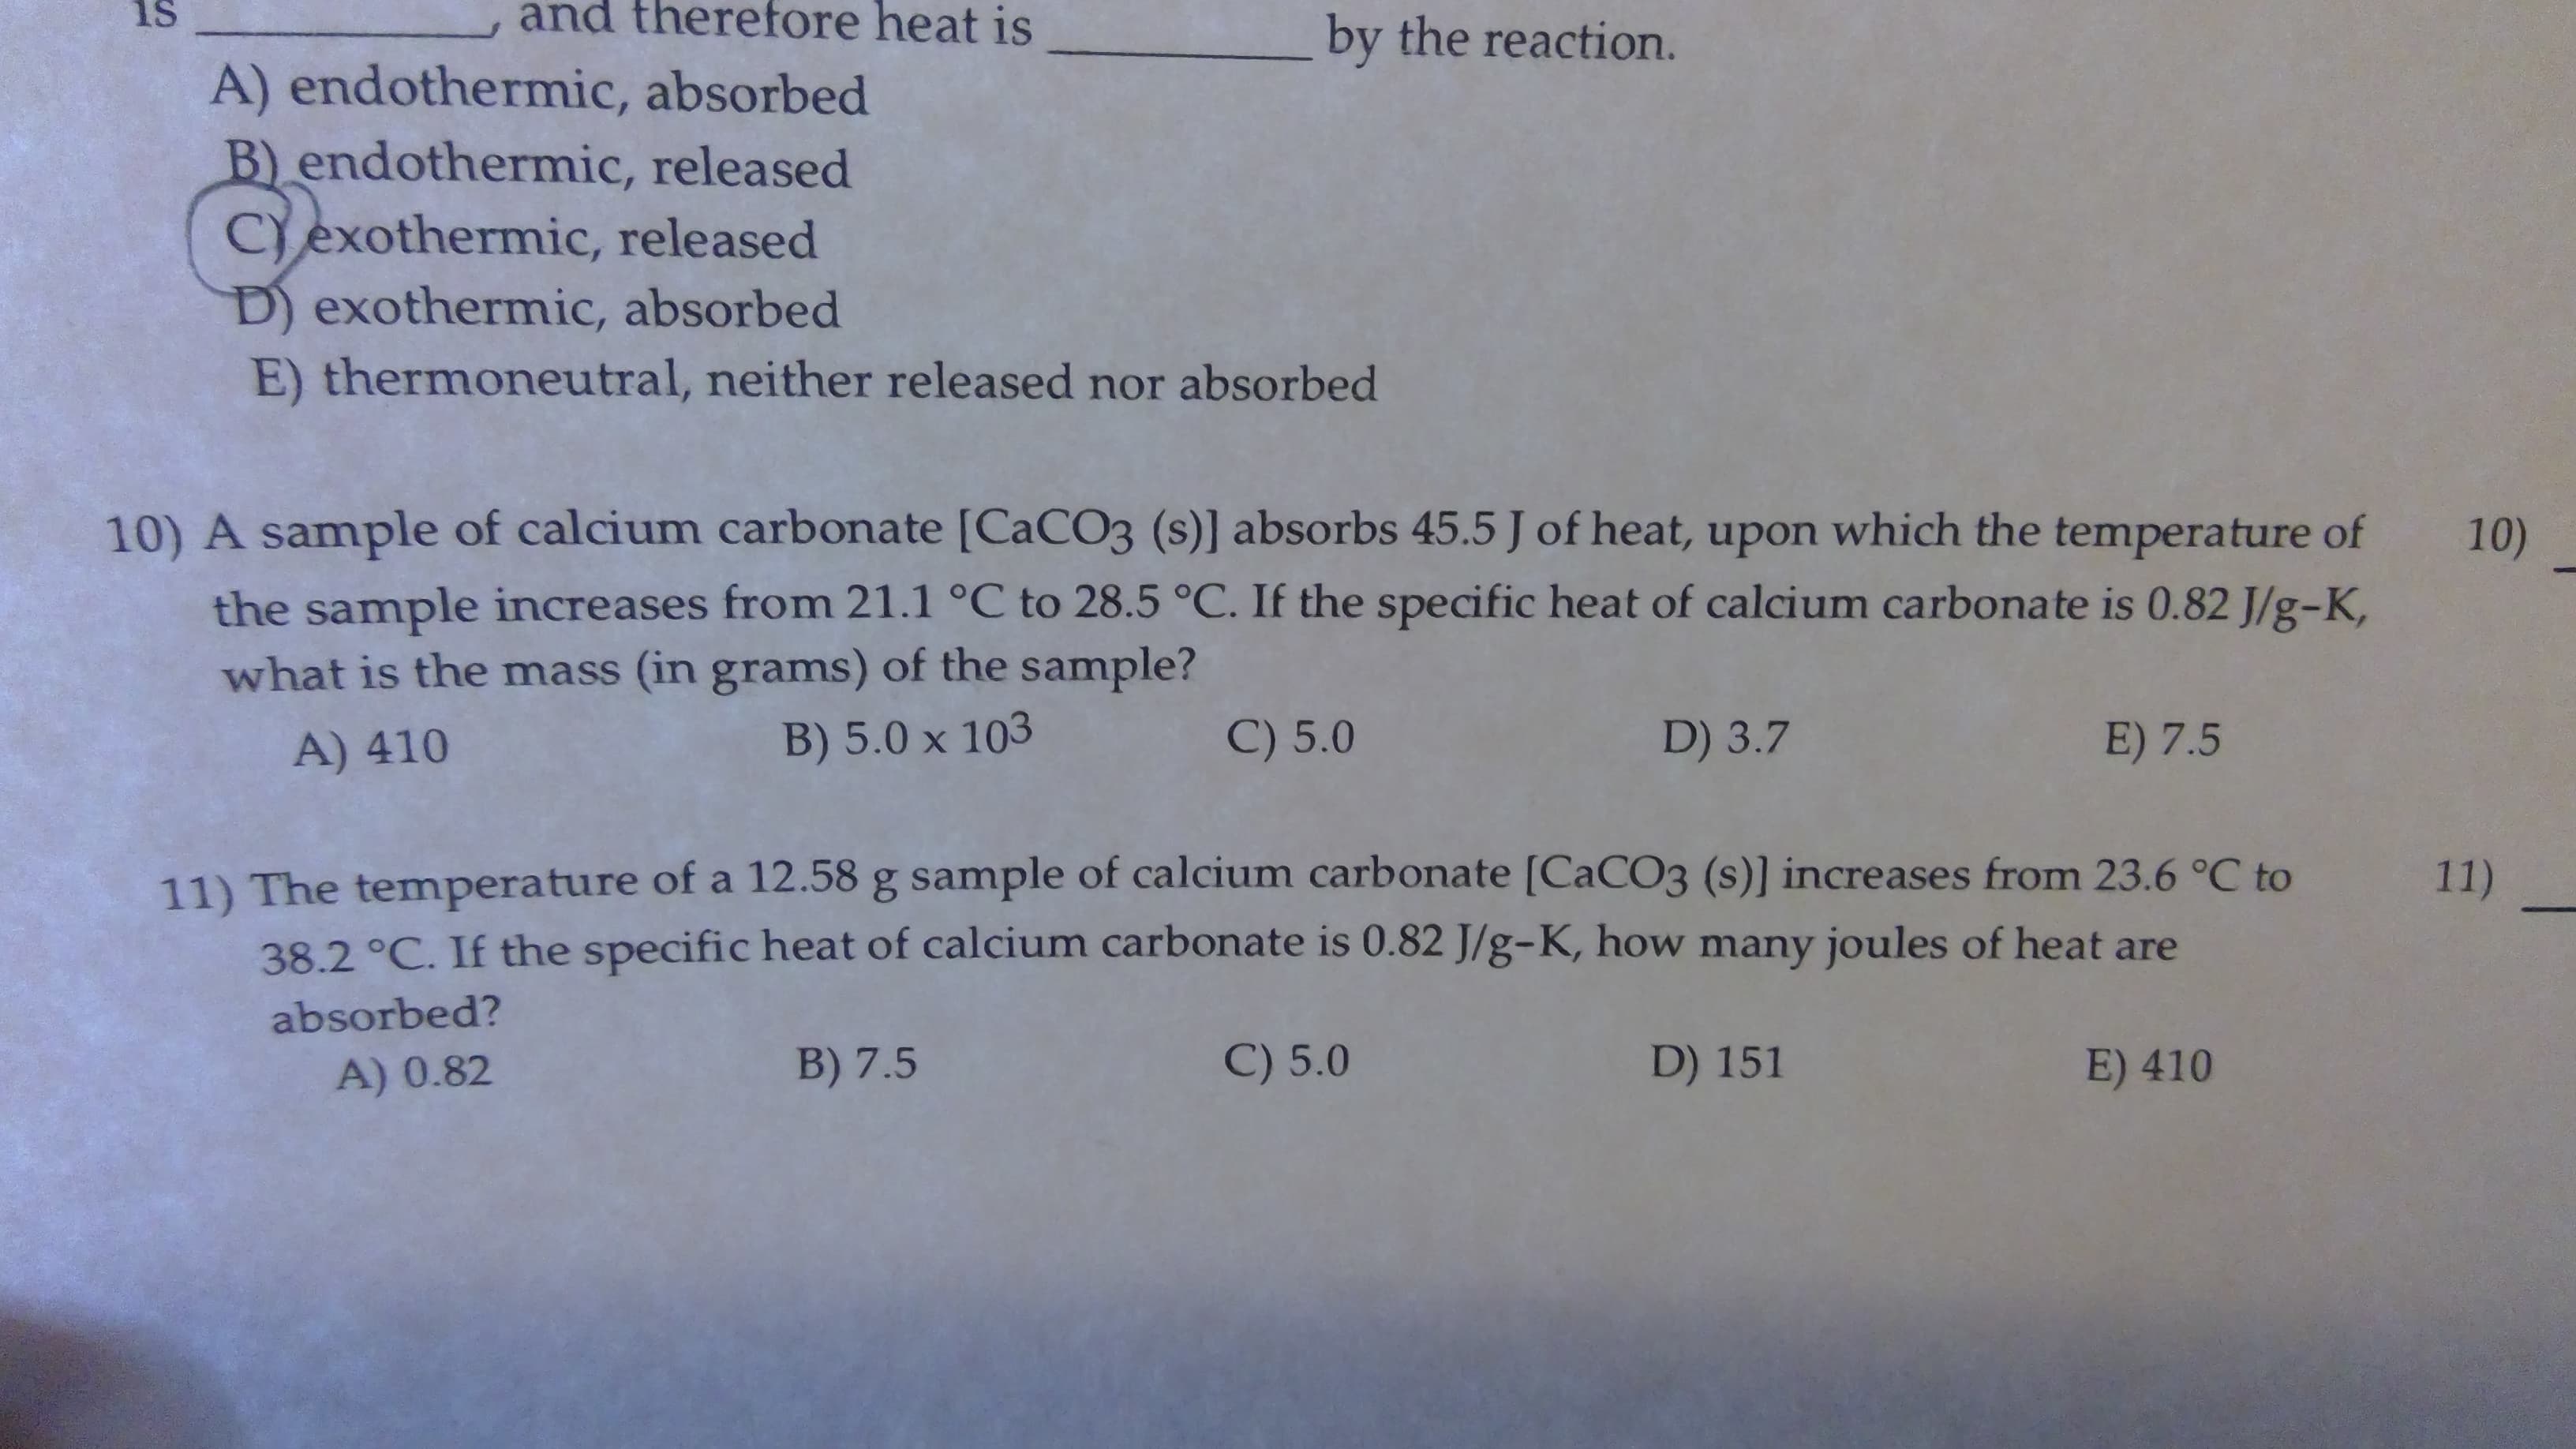 and therefore heat is
is
by the reaction.
A) endothermic, absorbed
B) endothermic, released
Cexothermic, released
D) exothermic, absorbed
E) thermoneutral, neither released nor absorbed
10) A sample of calcium carbonate [CaCO3 (s)] absorbs 45.5 J of heat, upon which the temperature of
10)
the sample increases from 21.1 °C to 28.5 °C. If the specific heat of calcium carbonate is 0.82 J/g-K,
what is the mass (in grams) of the sample?
C) 5.0
D) 3.7
E) 7.5
B) 5.0 x 103
A) 410
11) The temperatu re of a 12.58 g sample of calcium carbonate [CaCO3 (s)] incre ases from 23.6 °C to
38.2 °C. If the specific heat of calcium carbonate is 0.82 J/g-K, how many joules of heat are
11)
absorbed?
C) 5.0
D) 151
B) 7.5
E) 410
A) 0.82
